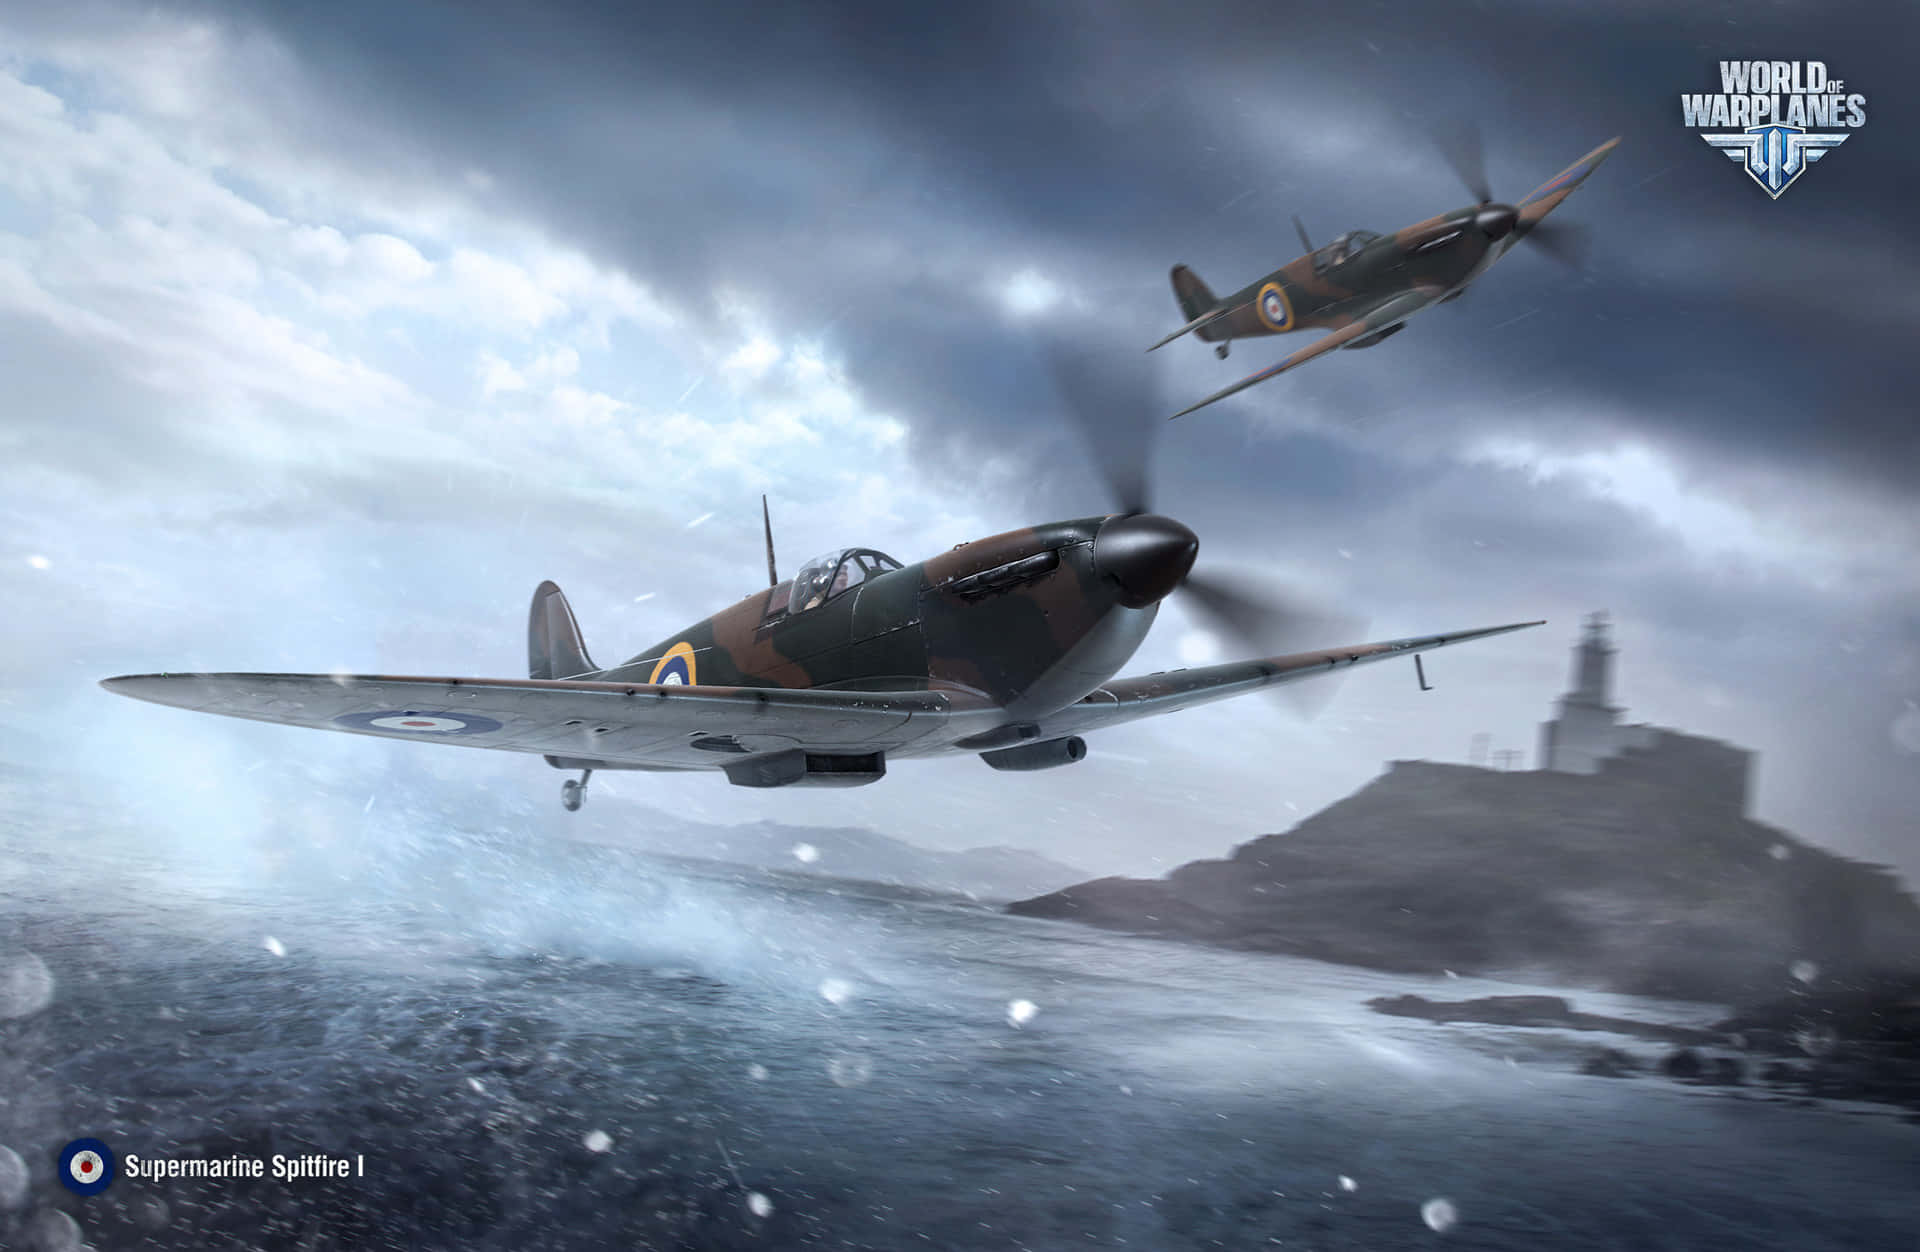 A Spitfire warplane from WWII soaring through the sky Wallpaper